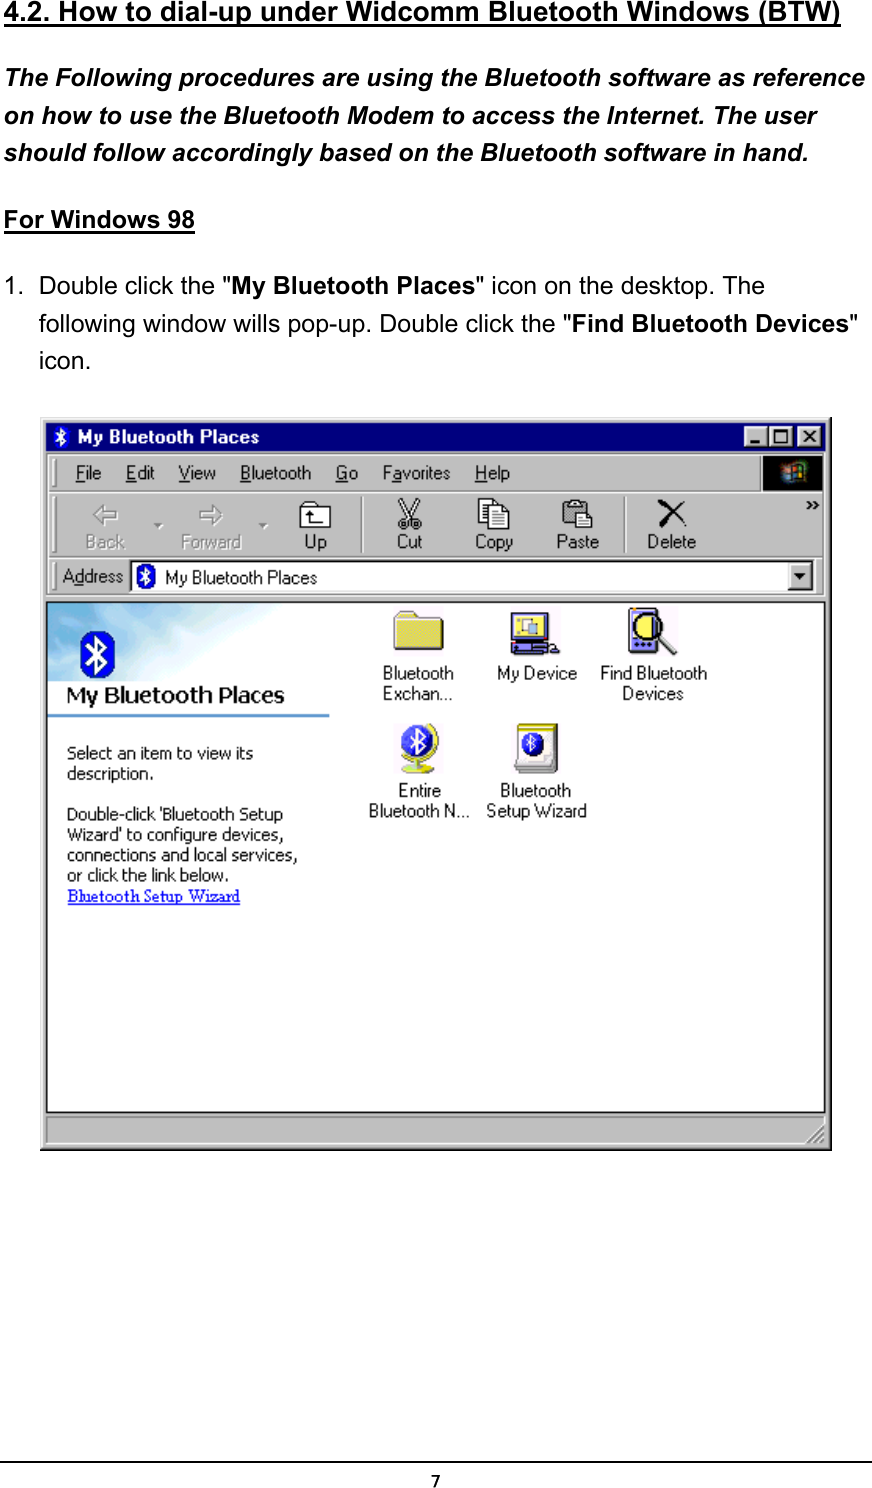   74.2. How to dial-up under Widcomm Bluetooth Windows (BTW) The Following procedures are using the Bluetooth software as reference on how to use the Bluetooth Modem to access the Internet. The user should follow accordingly based on the Bluetooth software in hand. For Windows 98 1.  Double click the &quot;My Bluetooth Places&quot; icon on the desktop. The following window wills pop-up. Double click the &quot;Find Bluetooth Devices&quot; icon.   